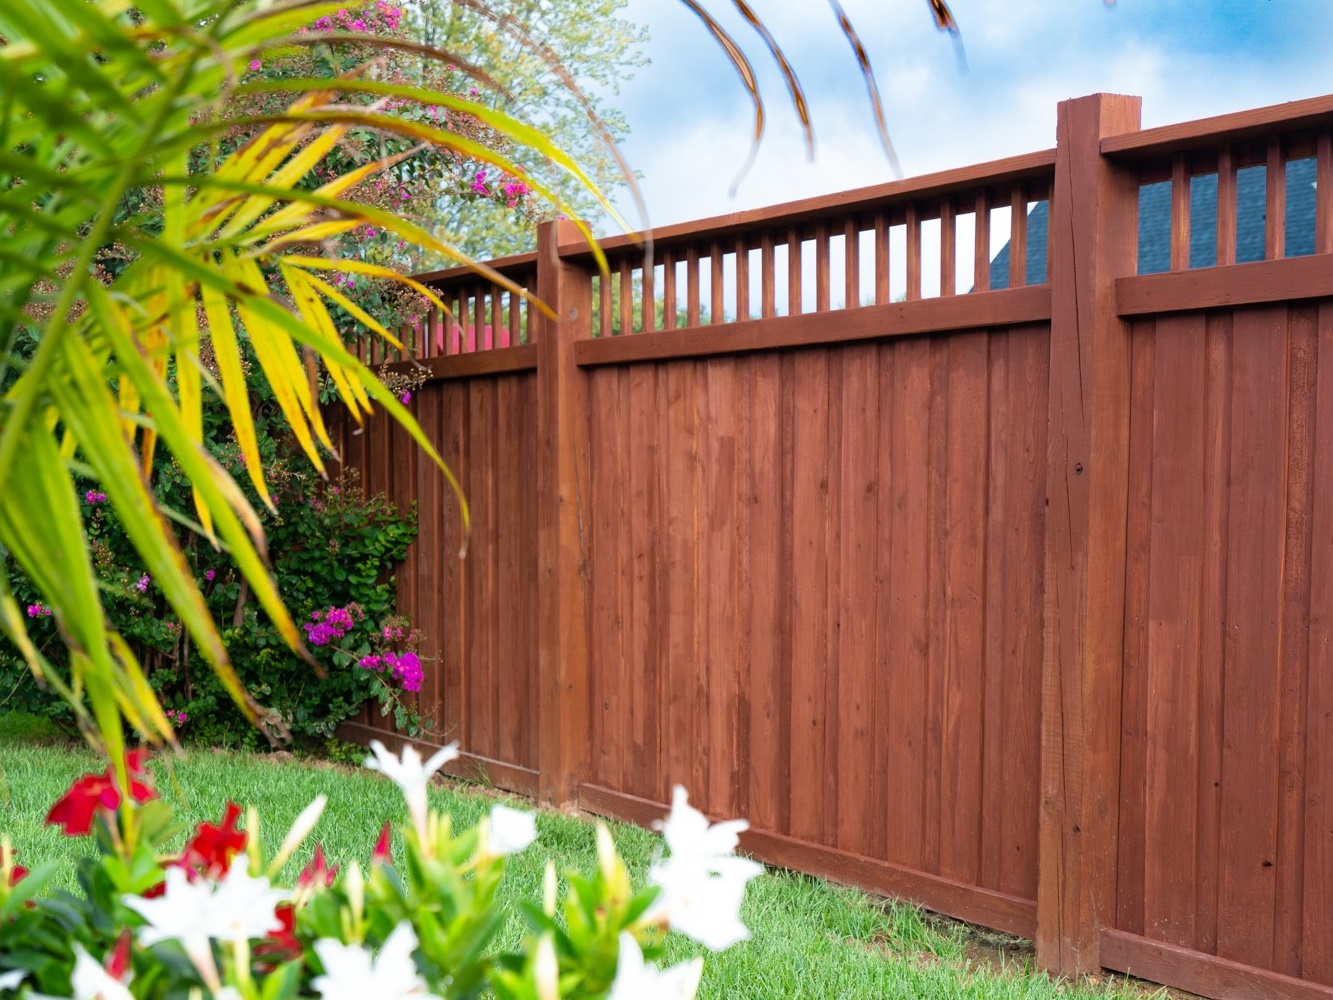 Henderson KY Spindle Top style wood fence